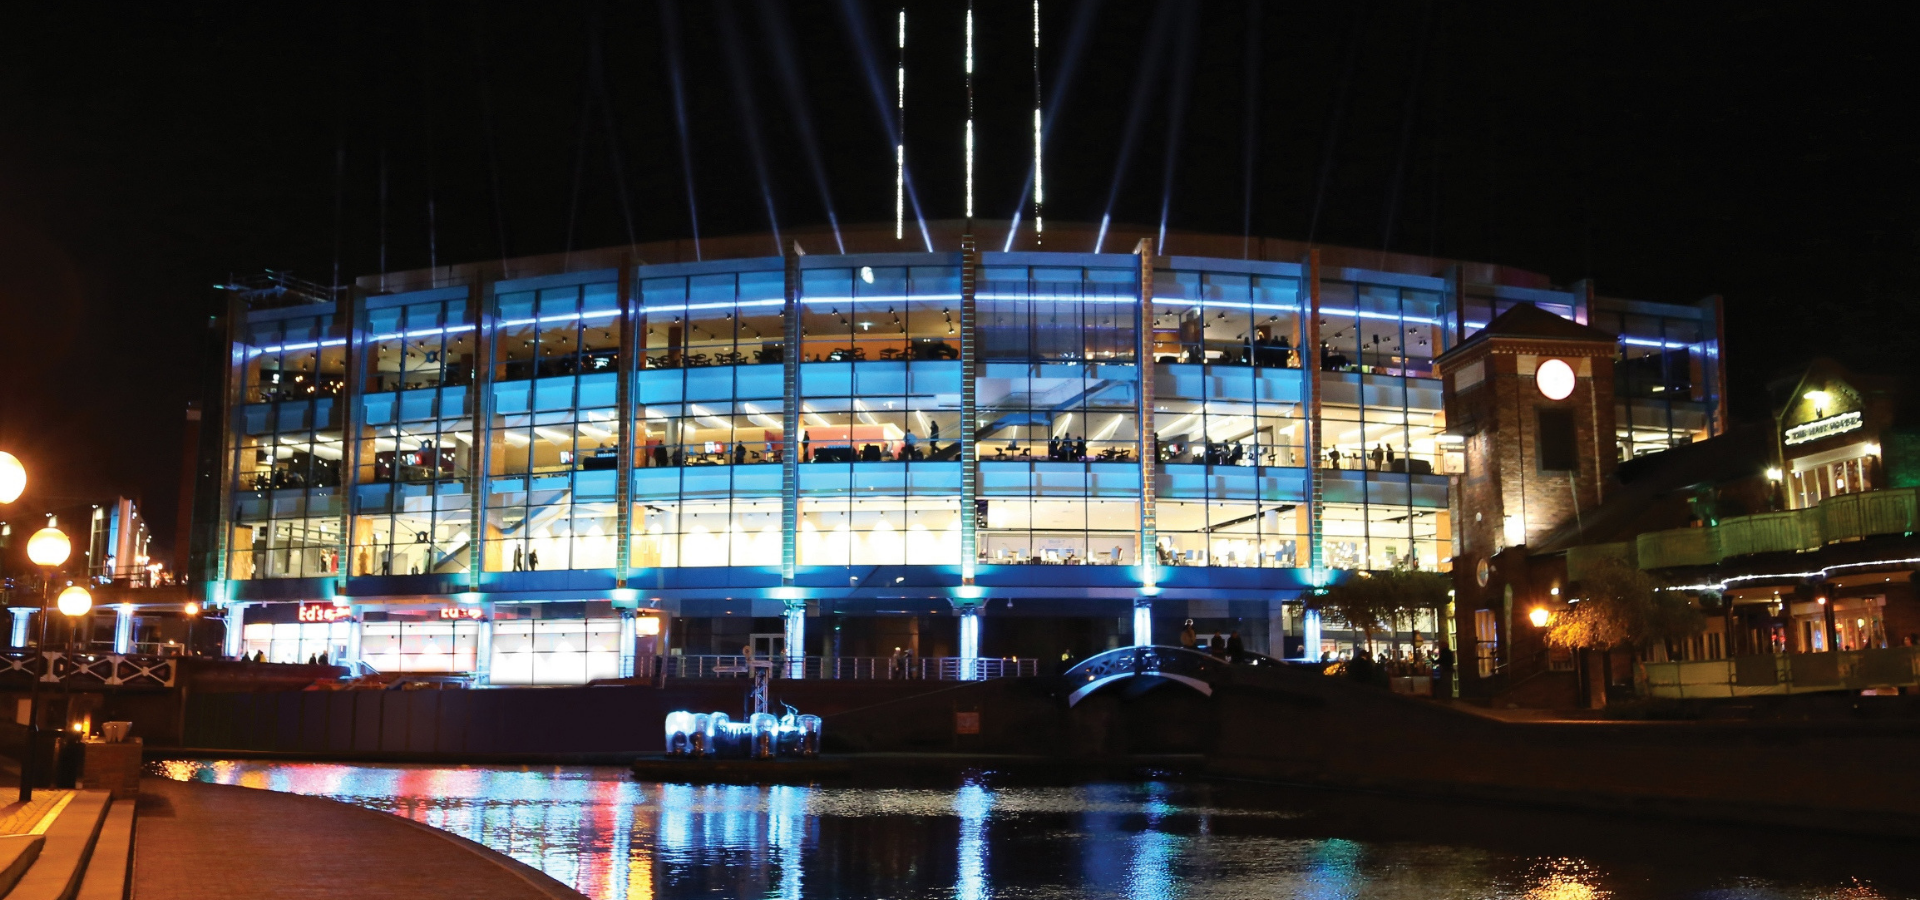 Exterior of Arena Birmingham overlooking the canal at night.